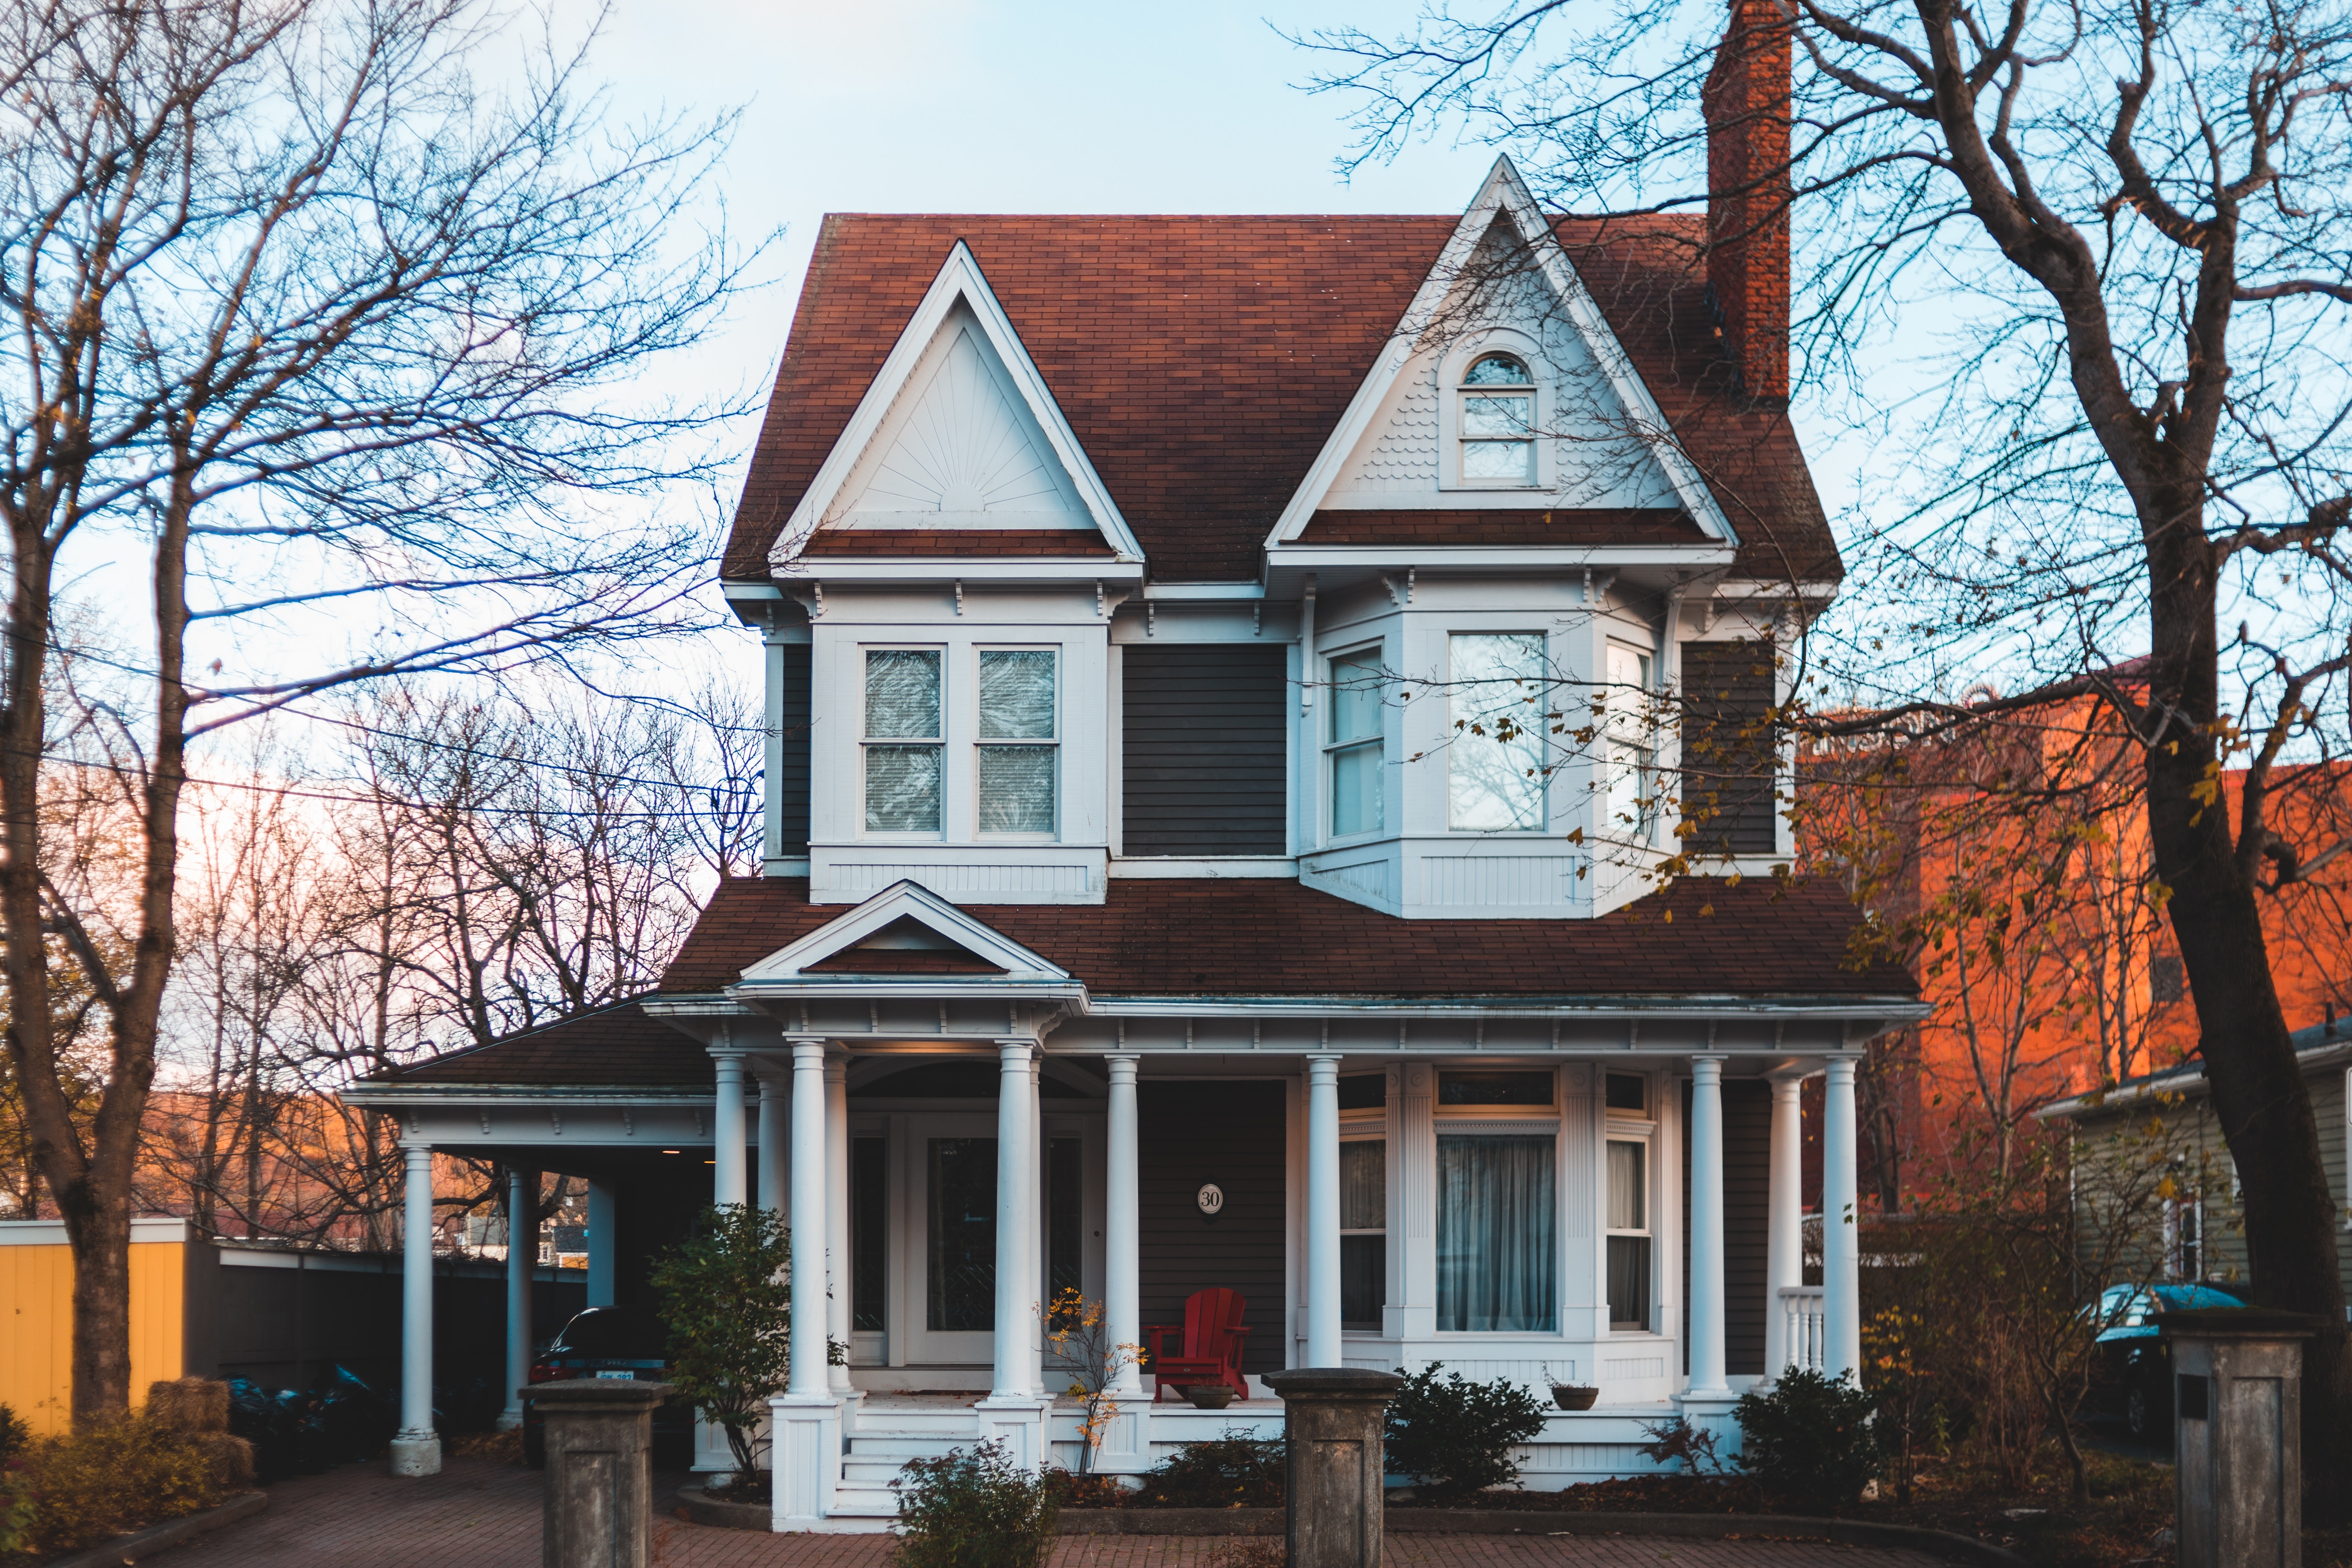 Is Owning An Old House Charming Or An Expensive Money Pit?